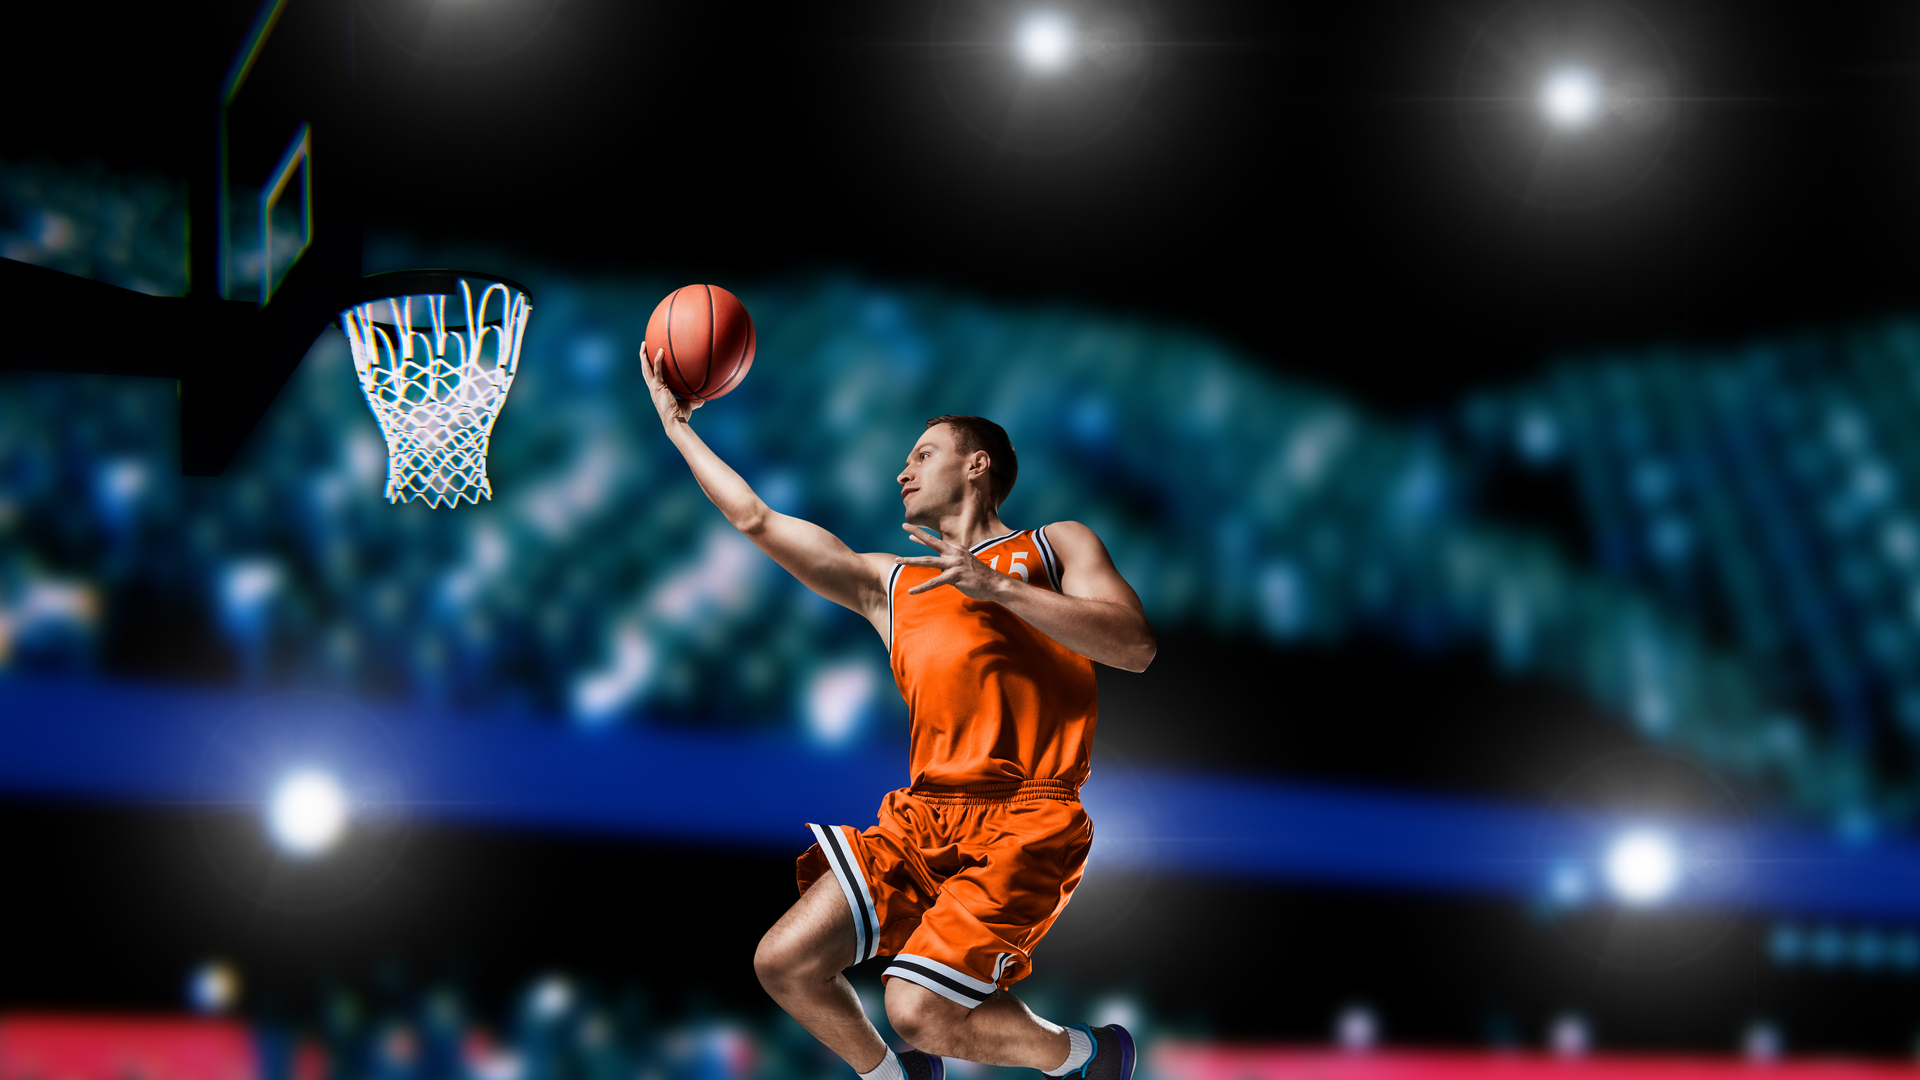 Playing Basketball: How To Improve Your Game